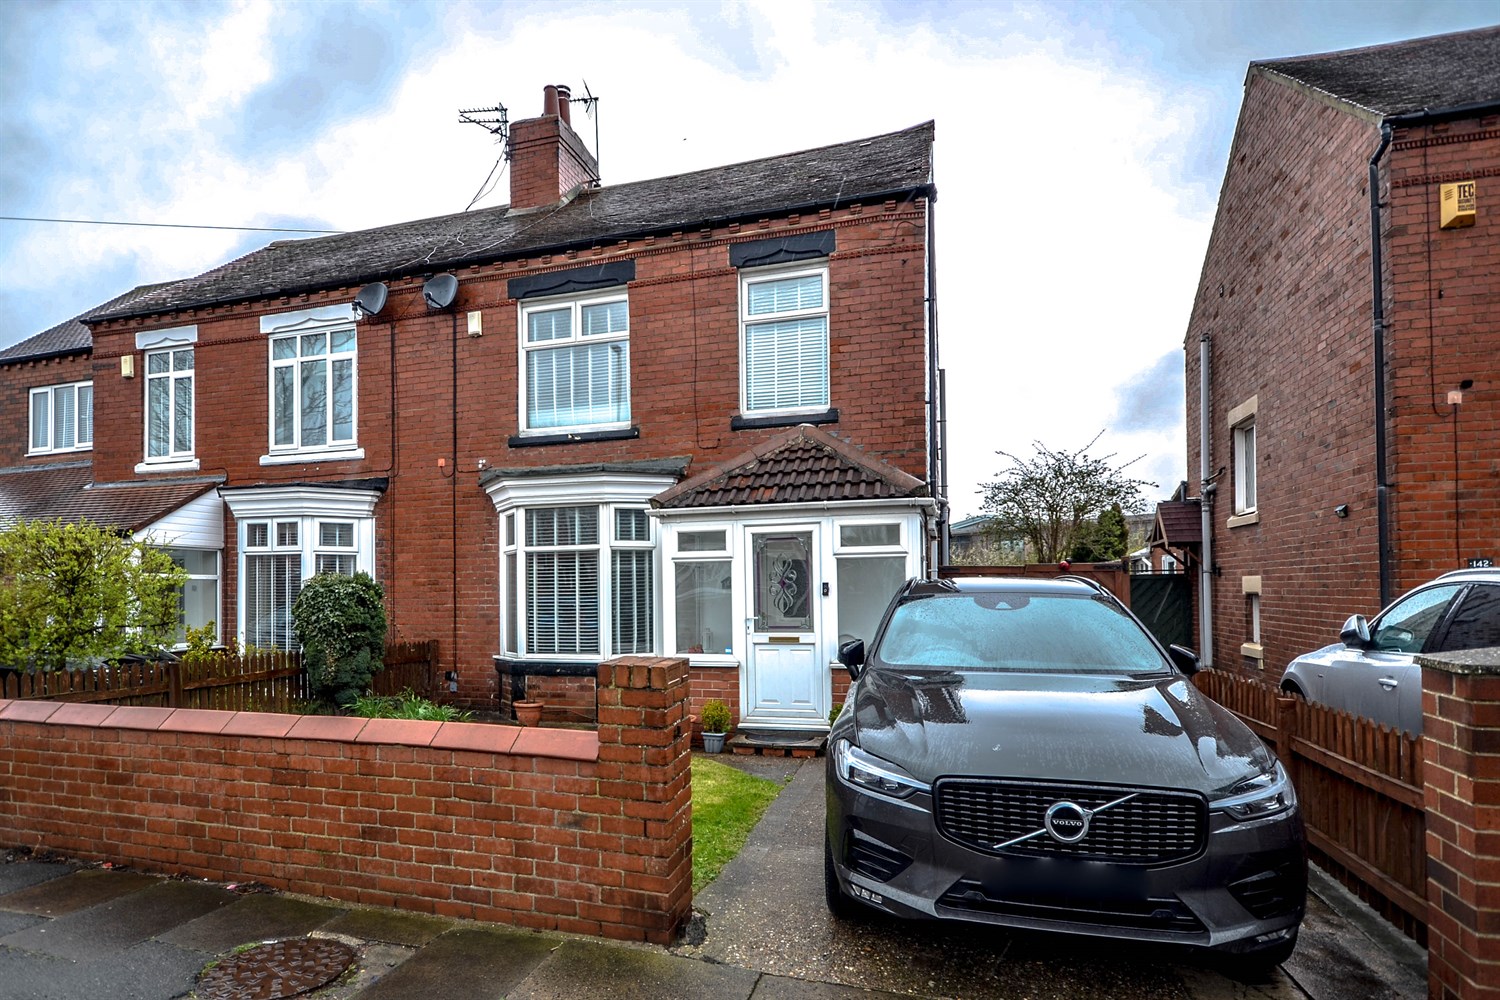 3 bed semi-detached house for sale in Harton Lane, South Shields - Property Image 1